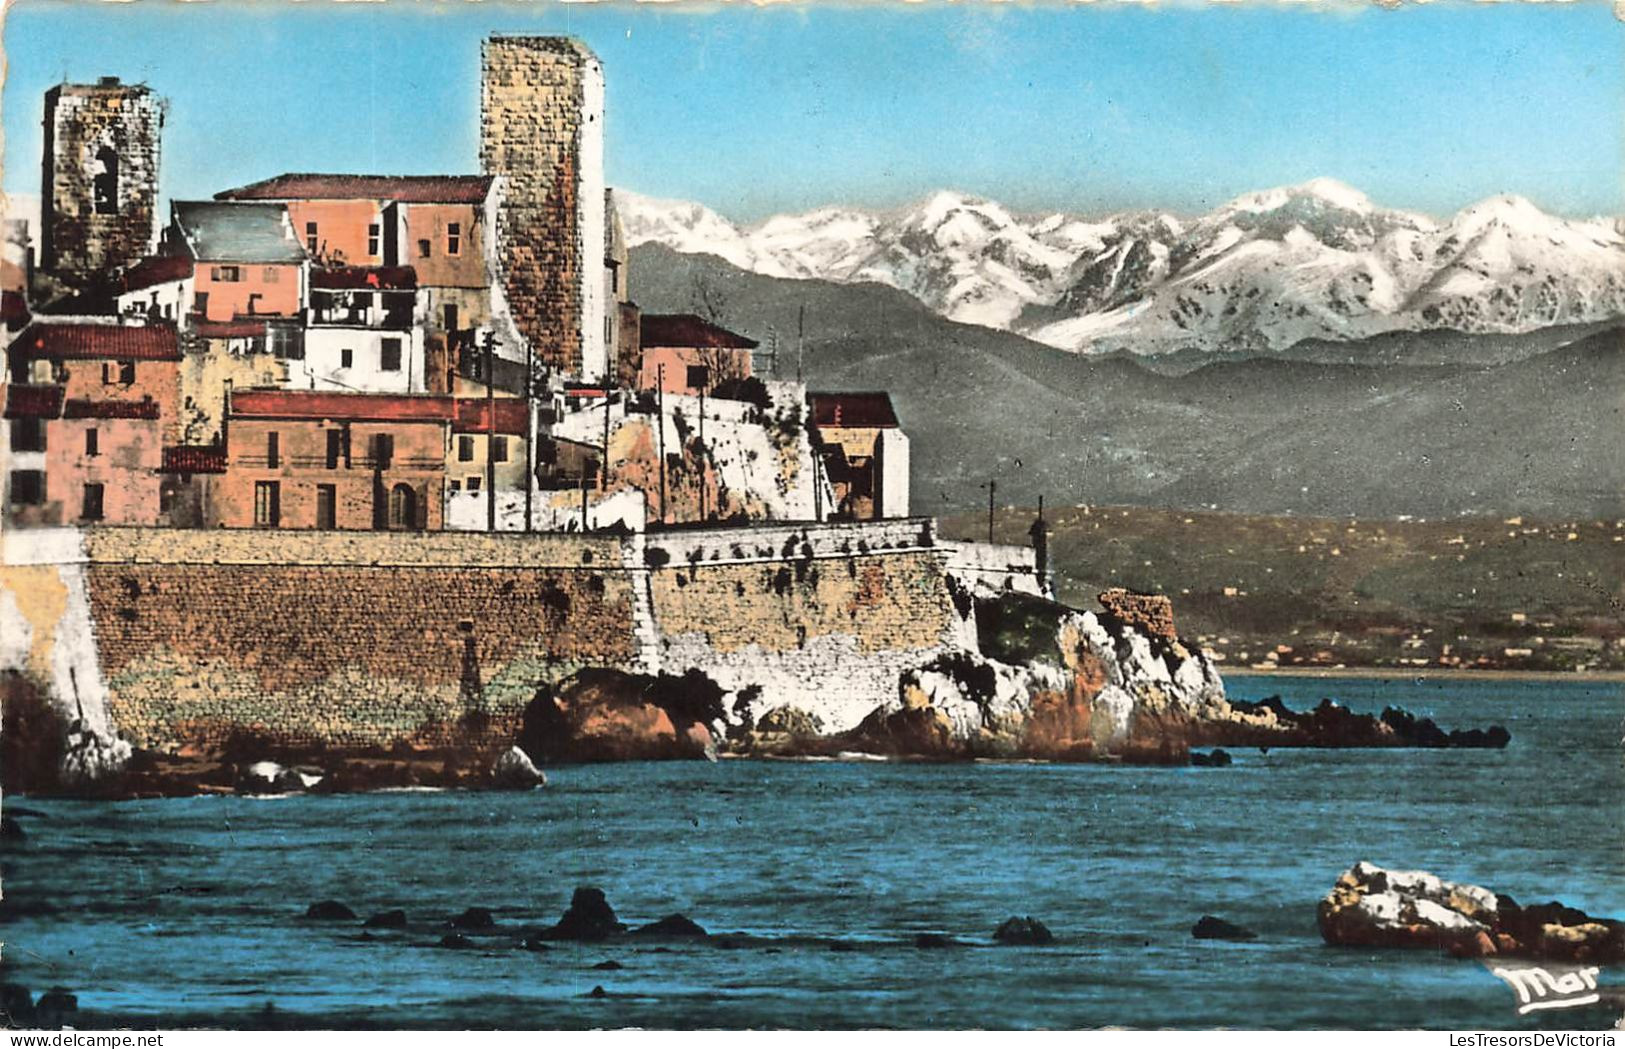 FRANCE - Antibes - Les Alpes - Carte Postale Ancienne - Antibes - Old Town